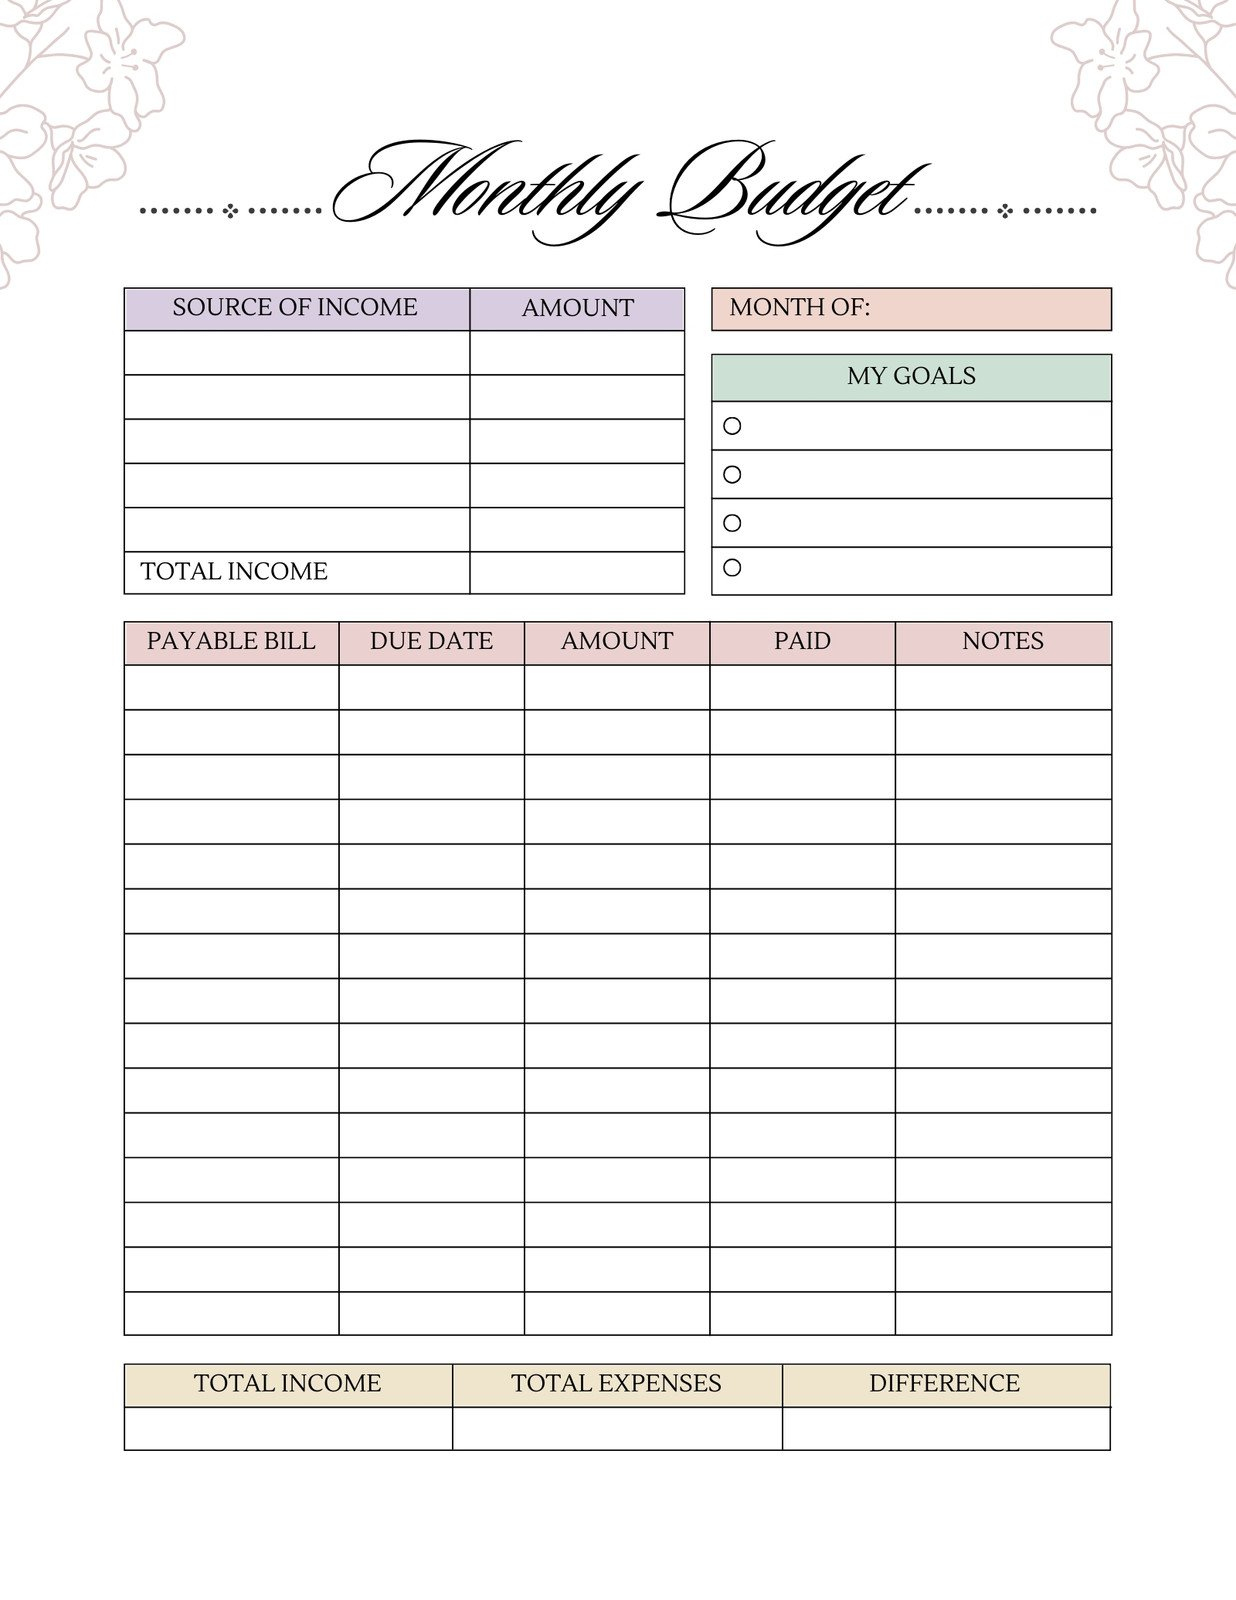 Free And Customizable Budget Templates within Free Printable Home Budget Planner